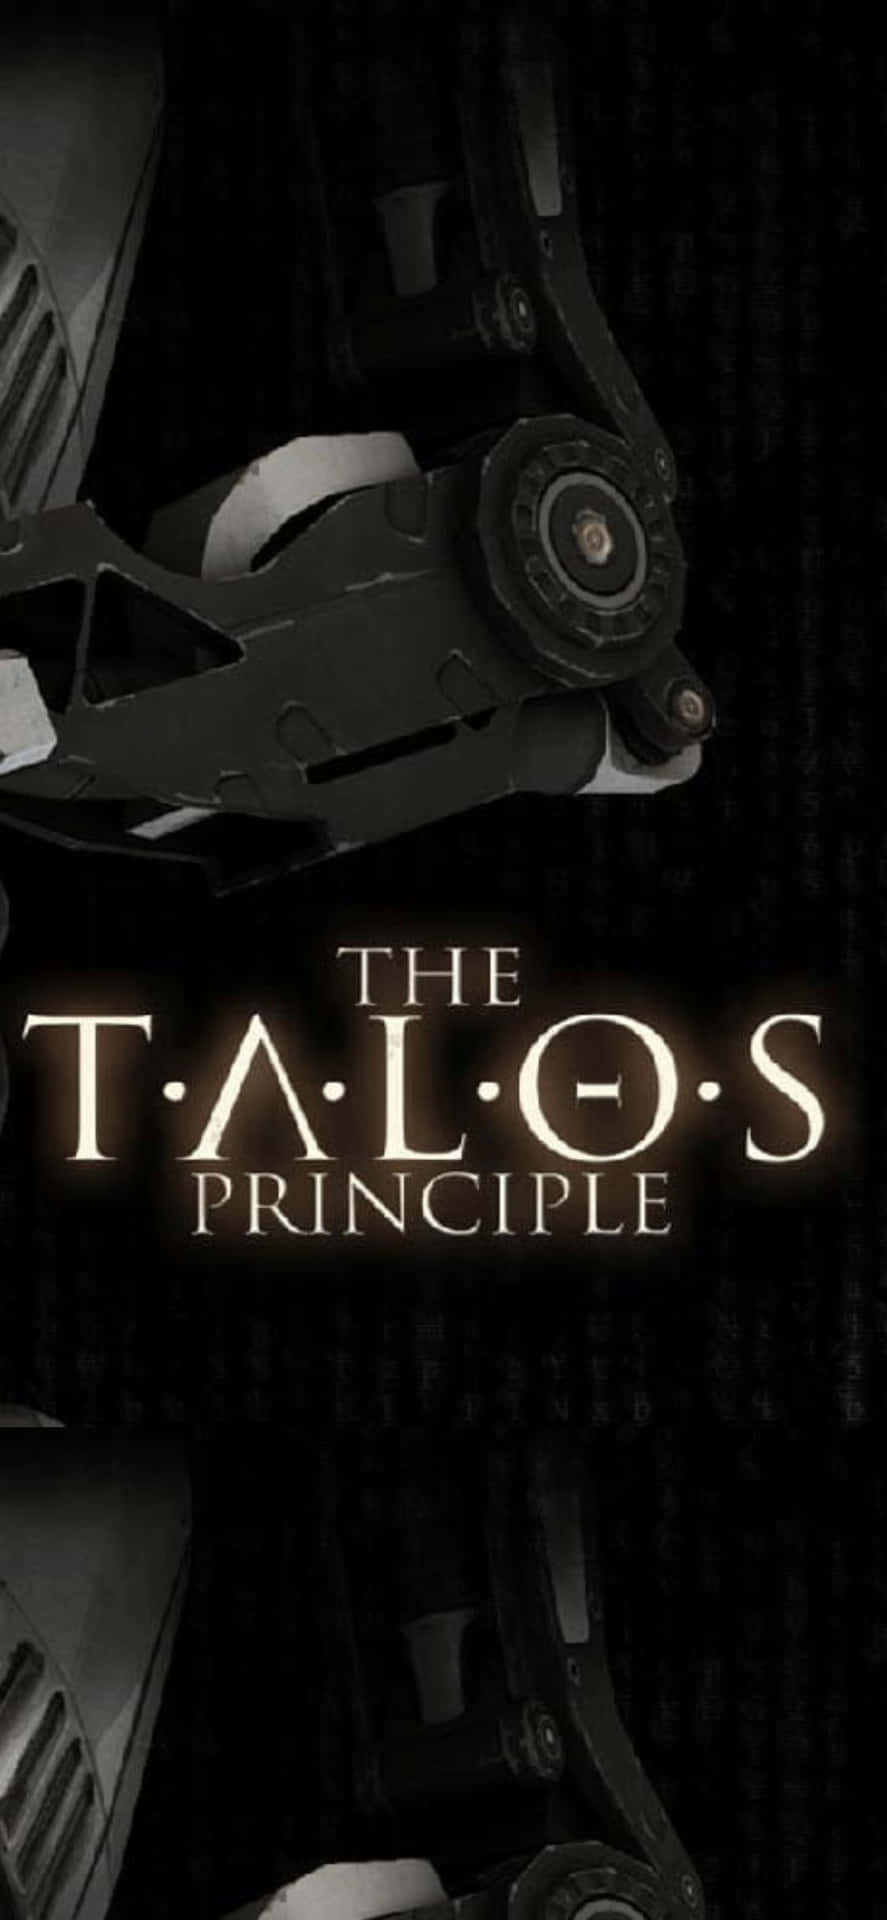 Discover the Ancient Mysteries of Talos in Iphone Xs